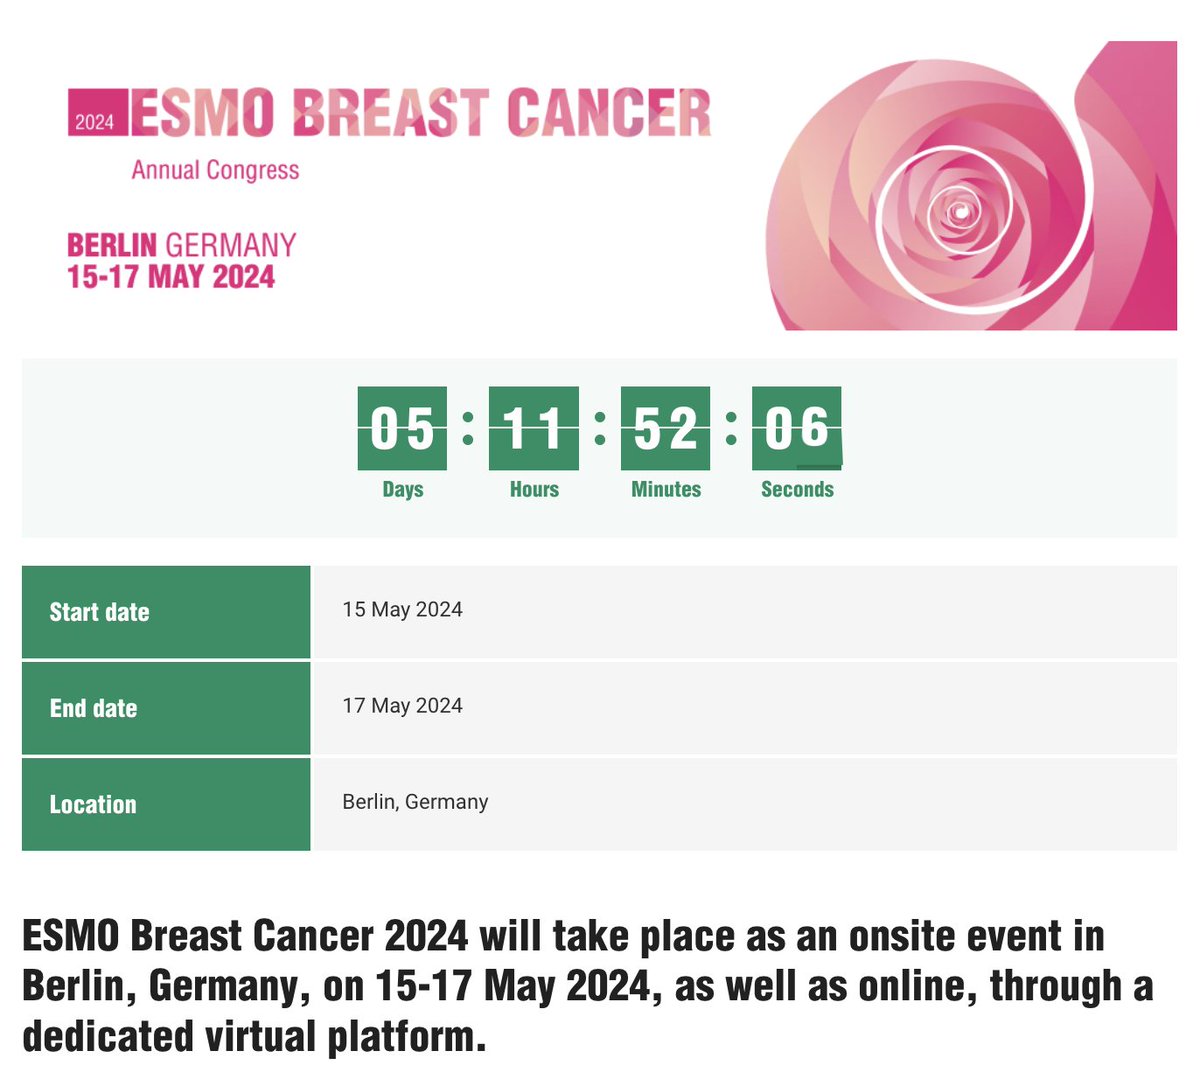 Countdown to #ESMOBreast2024: Only 6 days left! 

Excitement is building up as we gear up to attend this year's congress in Berlin, where key insights in the  #BreastCancer domain await! Who else is joining us for there?

Find out more at:  ow.ly/VeJn50RA95s

#MedEd #bcsm